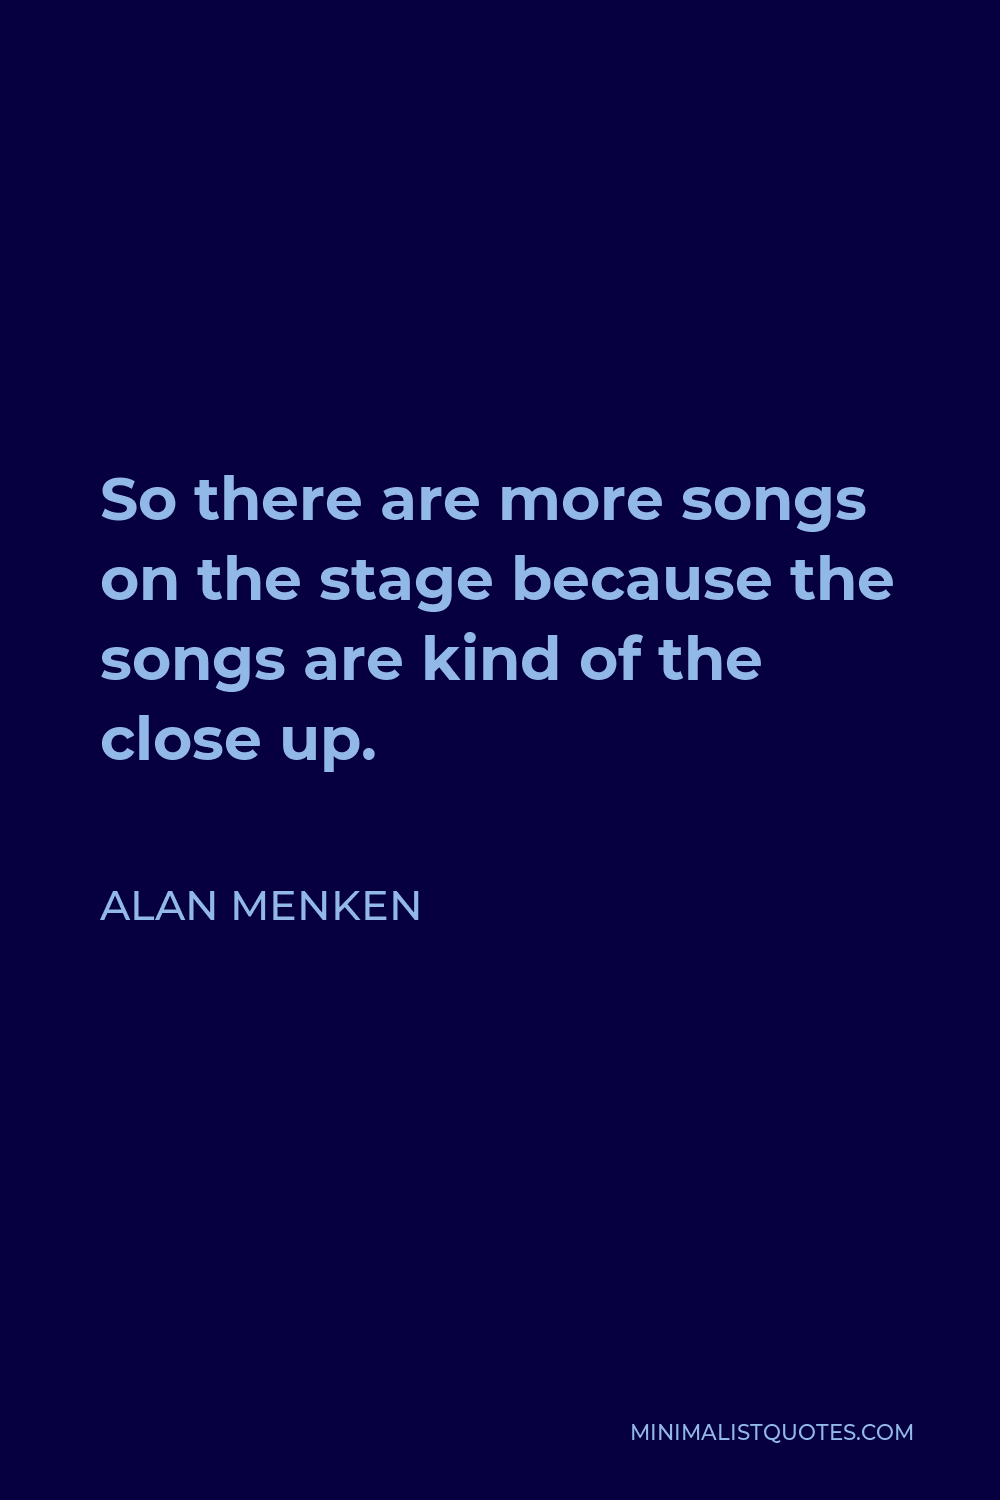 Alan Menken Quote - So there are more songs on the stage because the songs are kind of the close up.